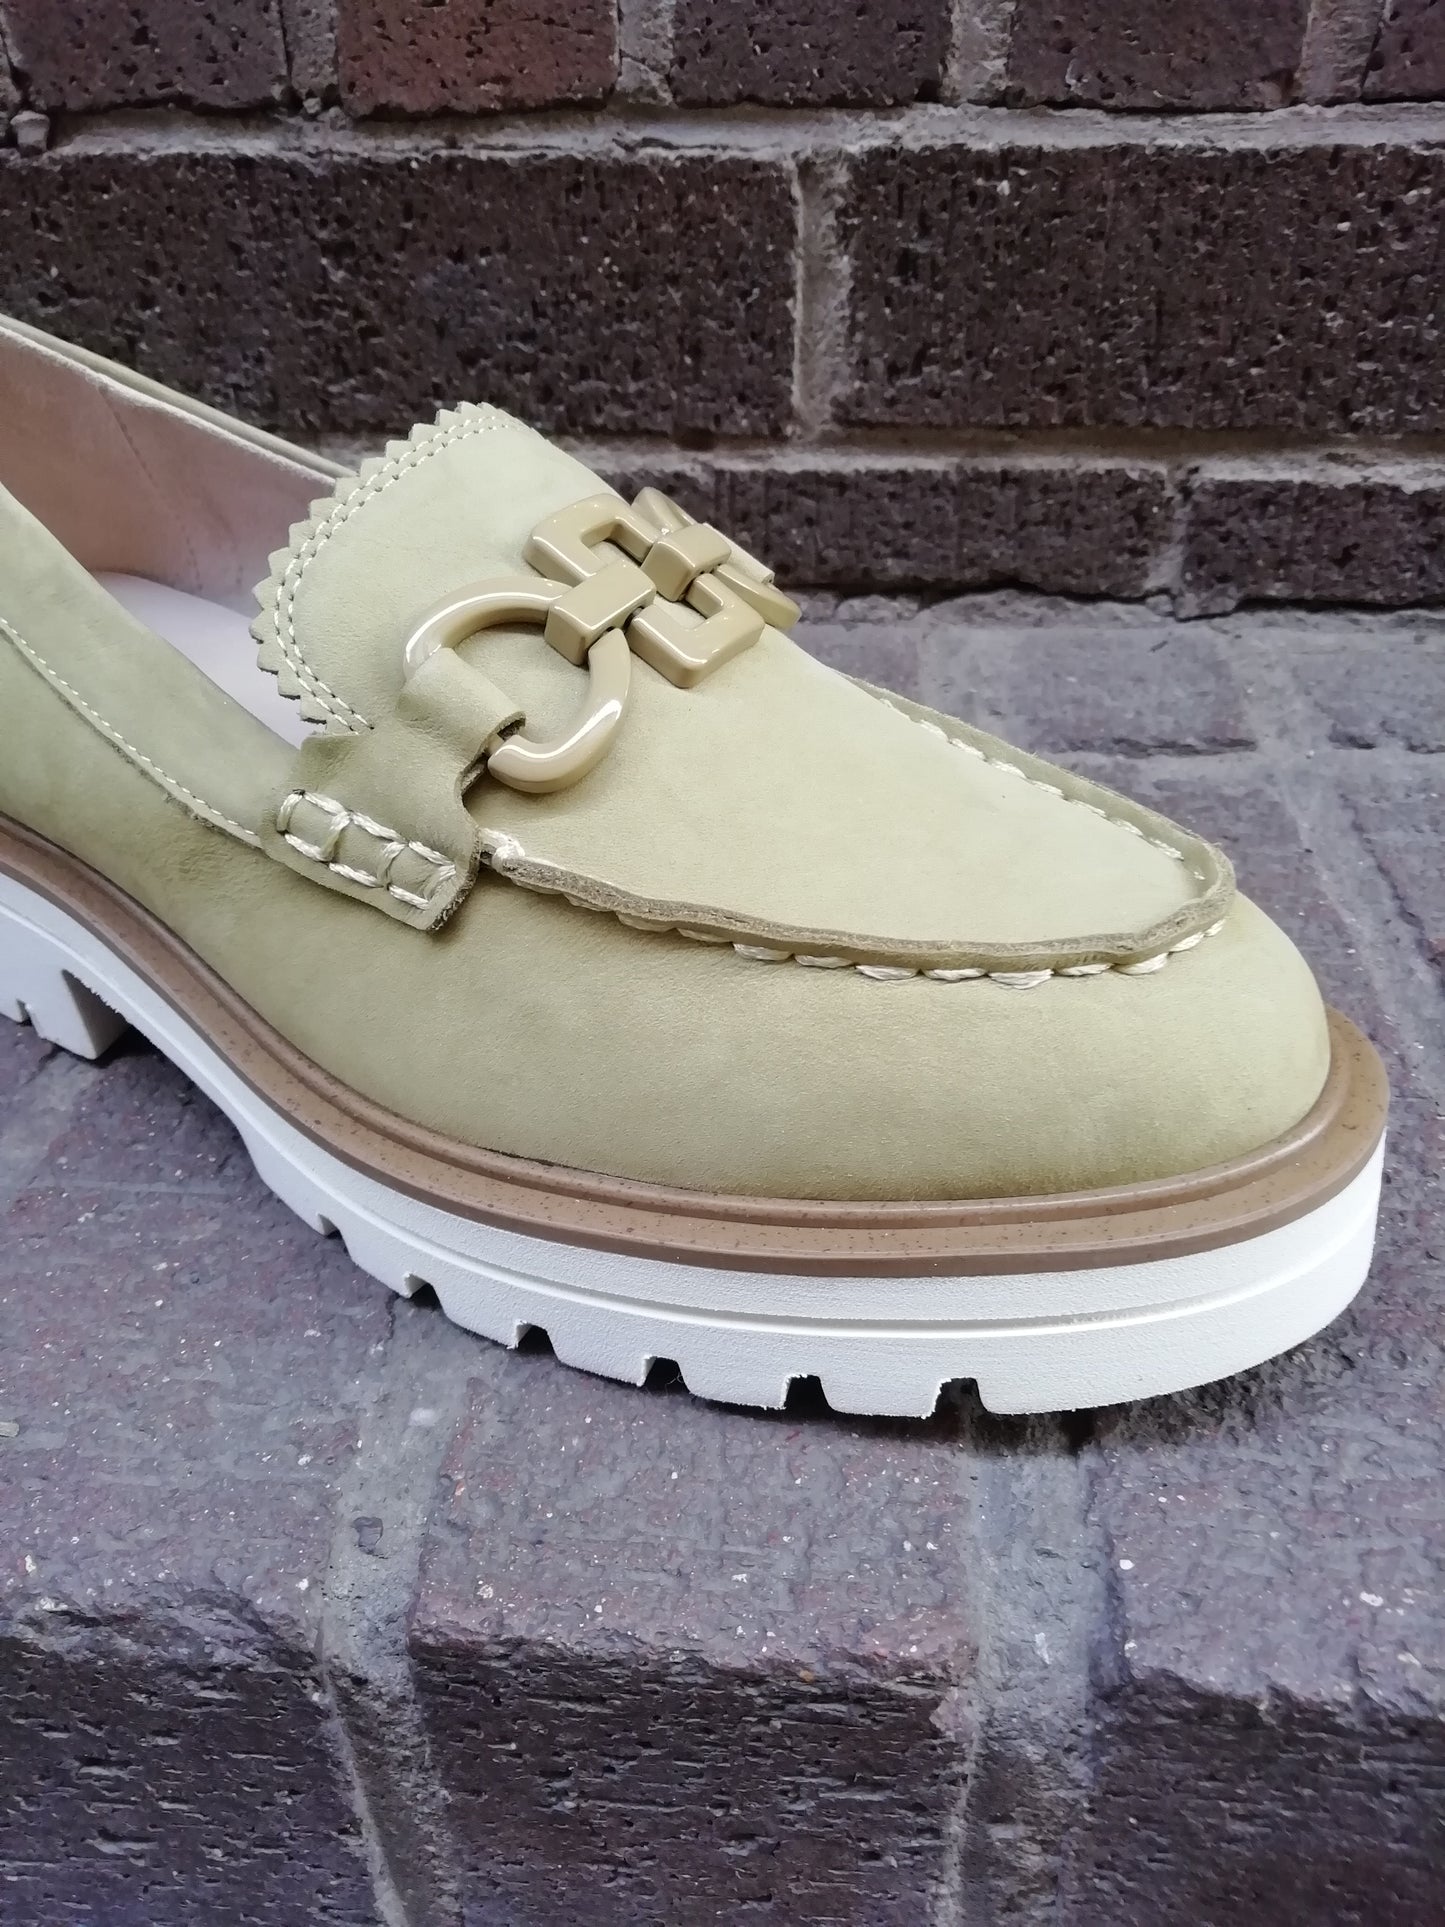 Caprice Green Nubuck Loafer. Only sizes 4 and 7.5 left.